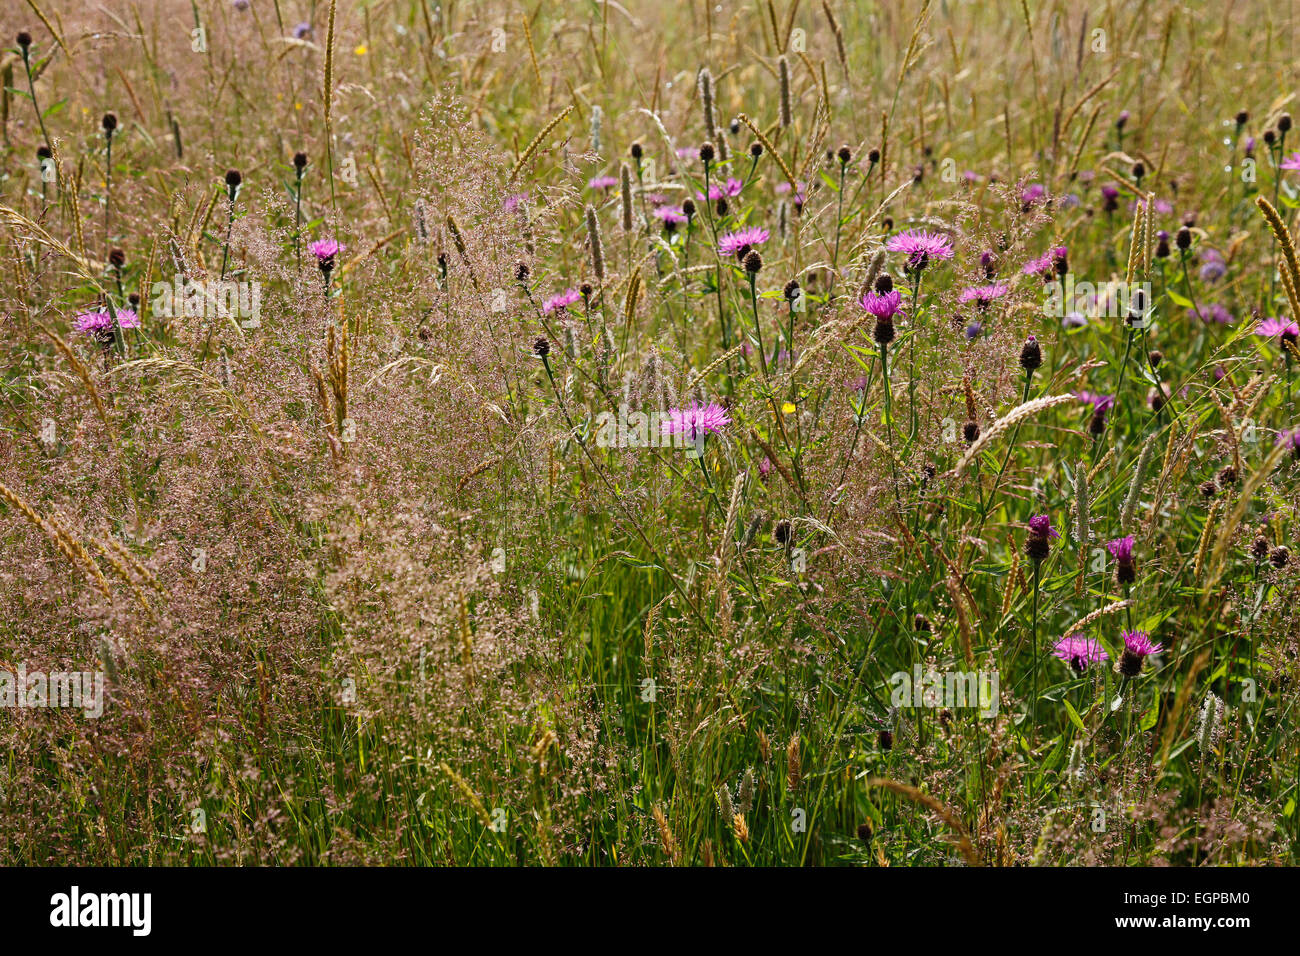 Knapweed, Centaurea nigra, Wild flower meadow in England, East Sussex, Rotherfield, with grasses and pink flowering knapweed. Stock Photo